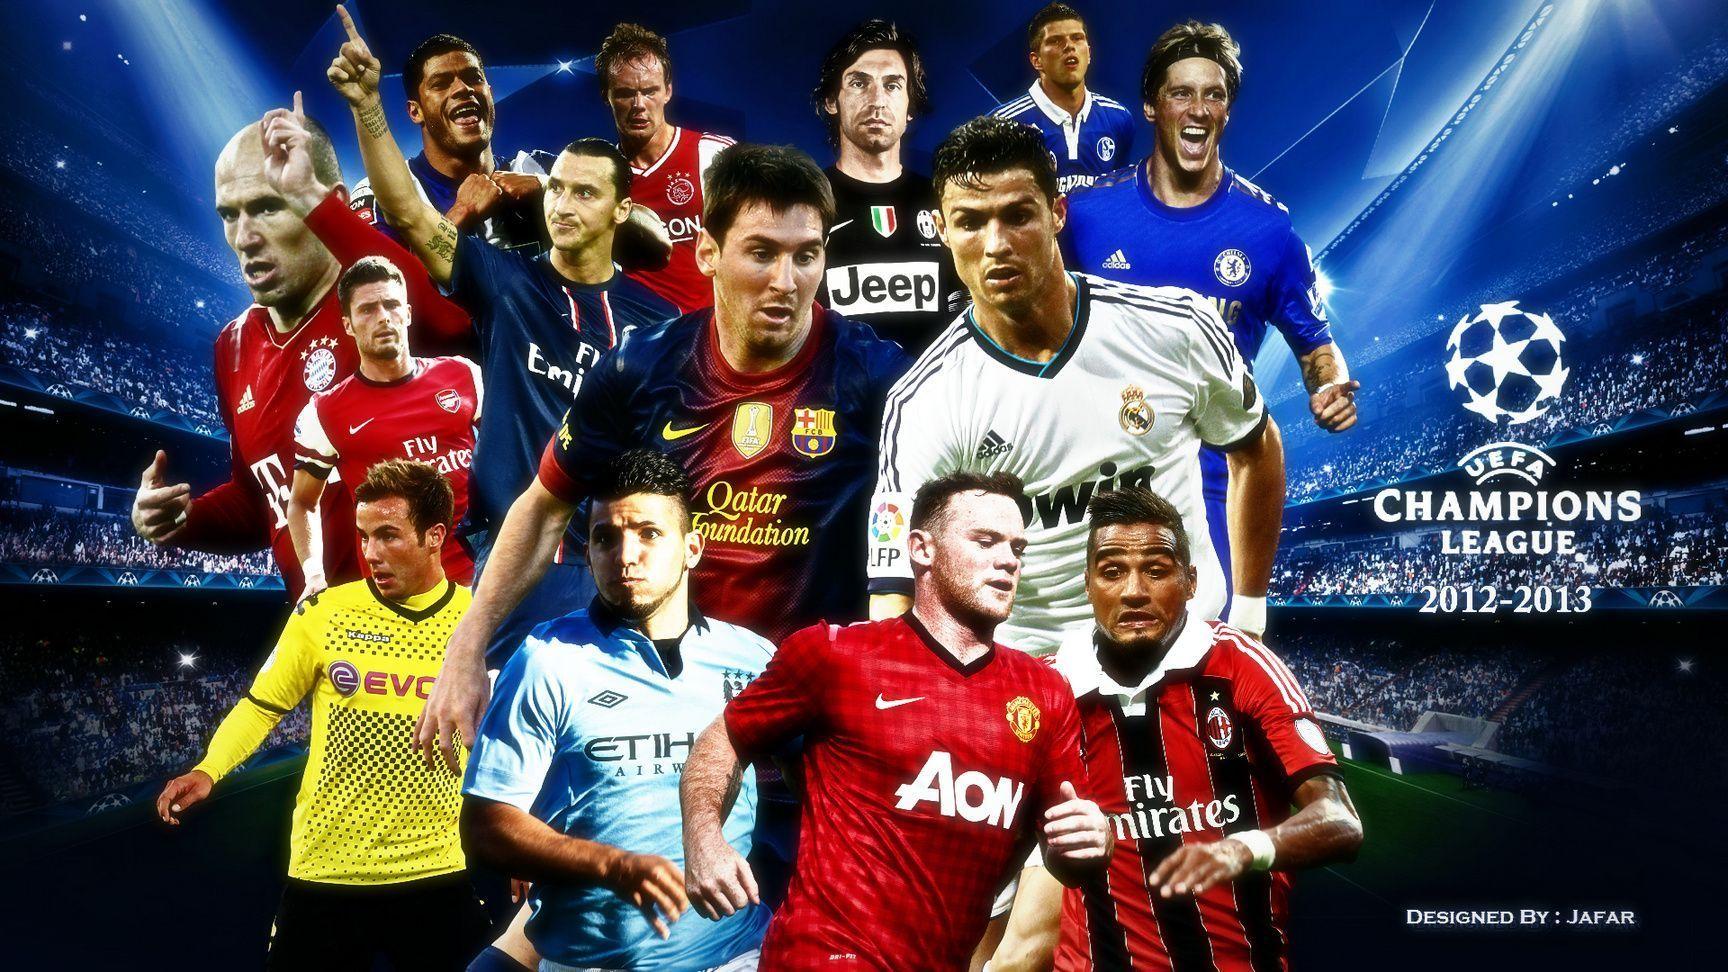 A Collections Team UEFA CHAMPIONS LEAGUE Wallpaper